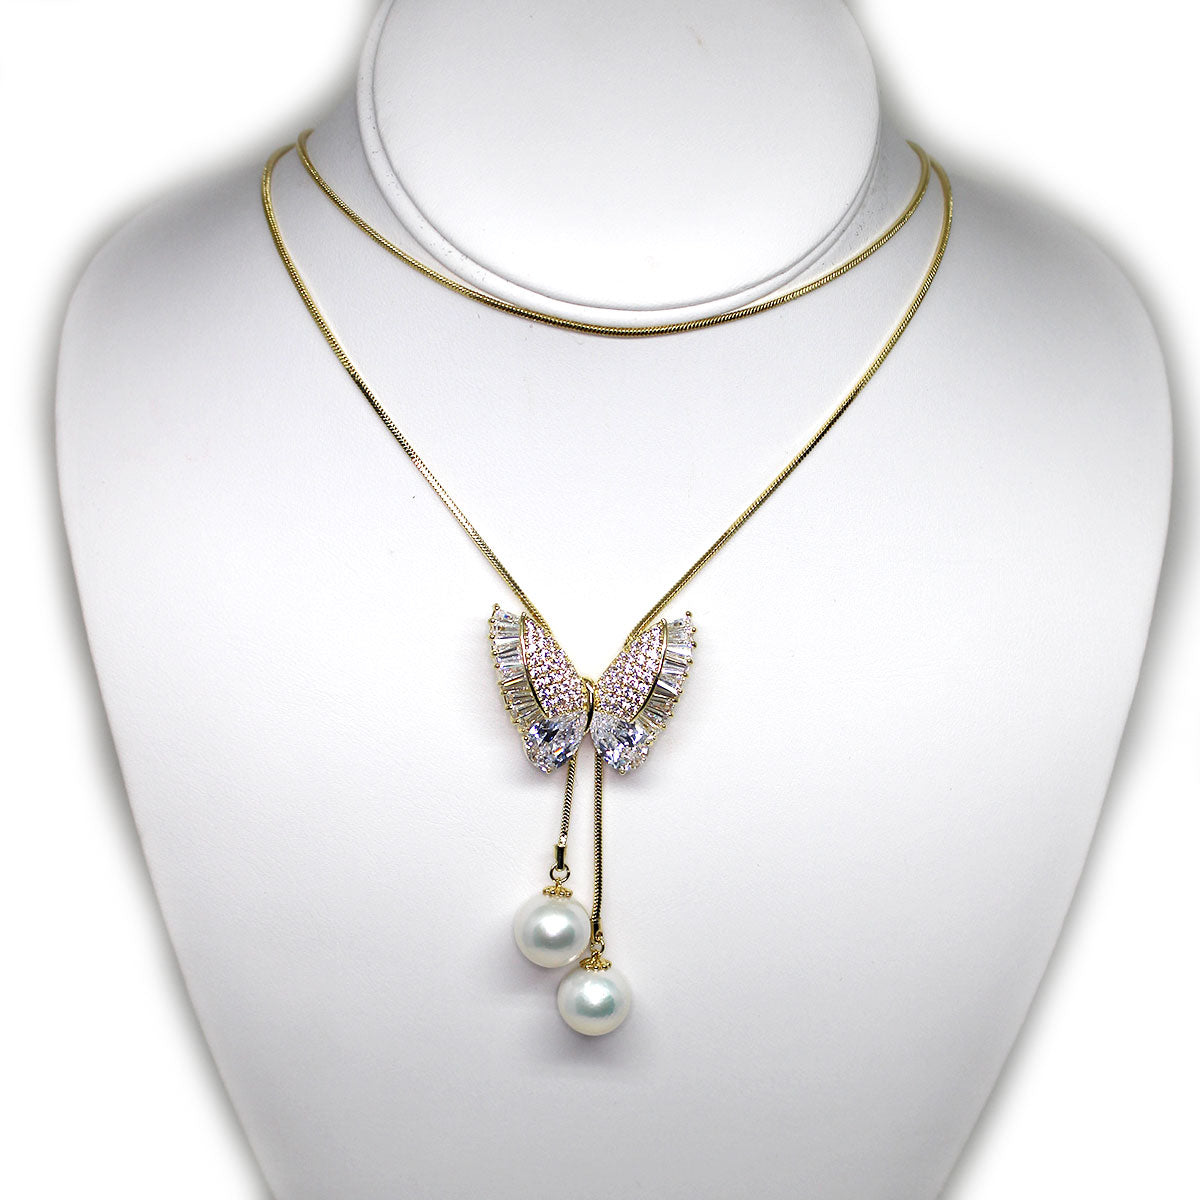 Shining Butterfly Double Edison Pearls 36 Inches Adjustable Necklace - Timeless Pearl